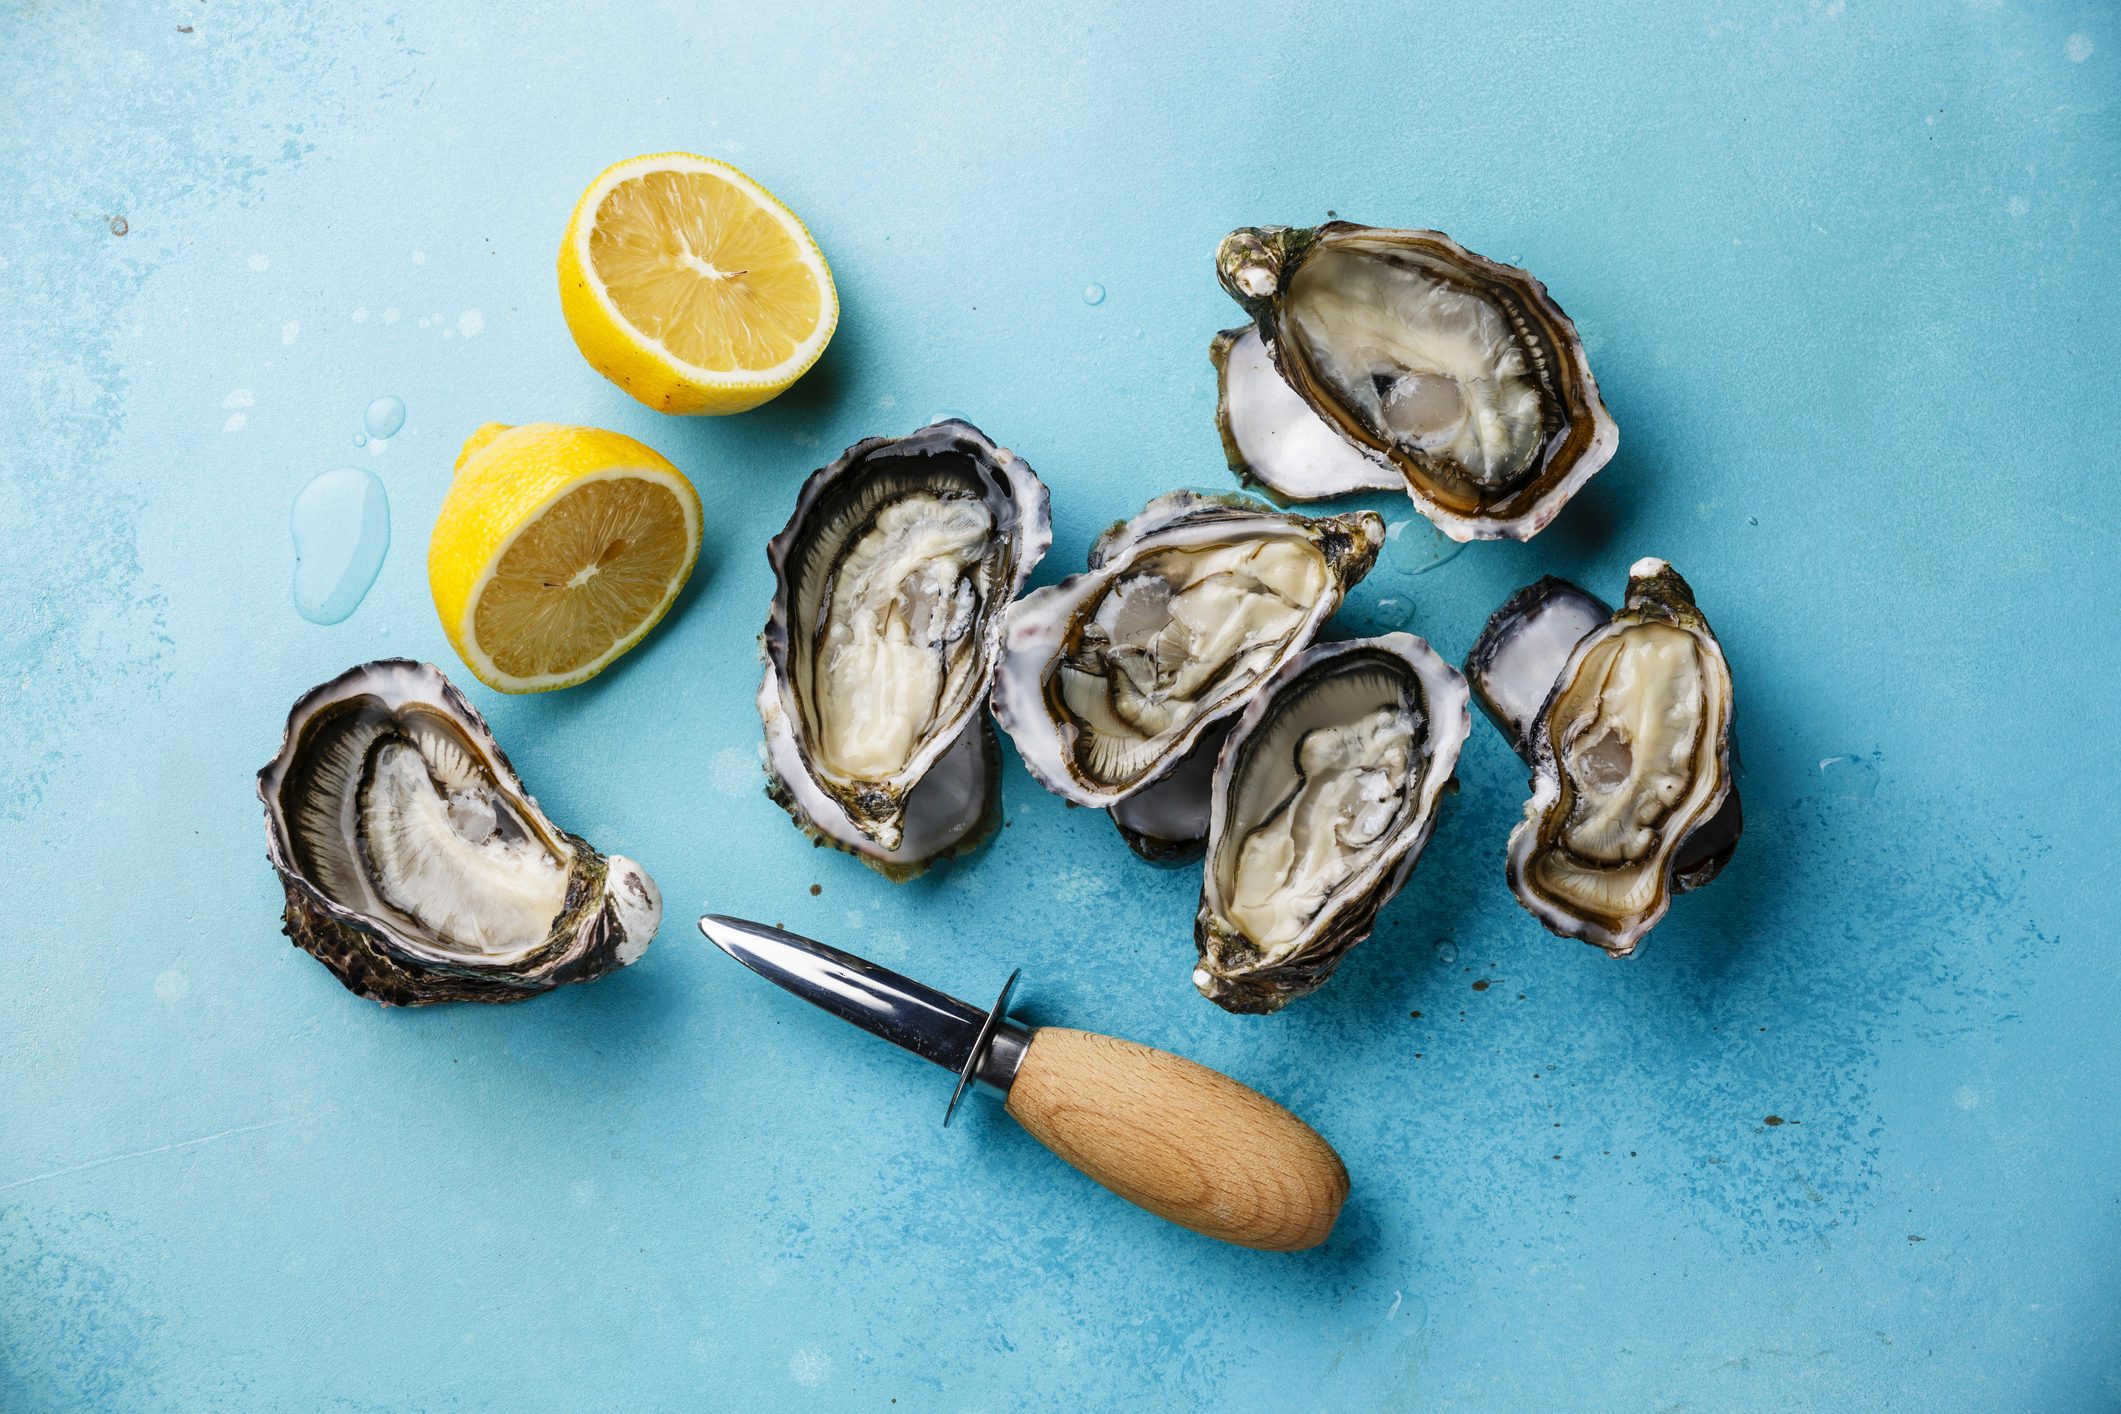 Open Oysters and lemon on blue background